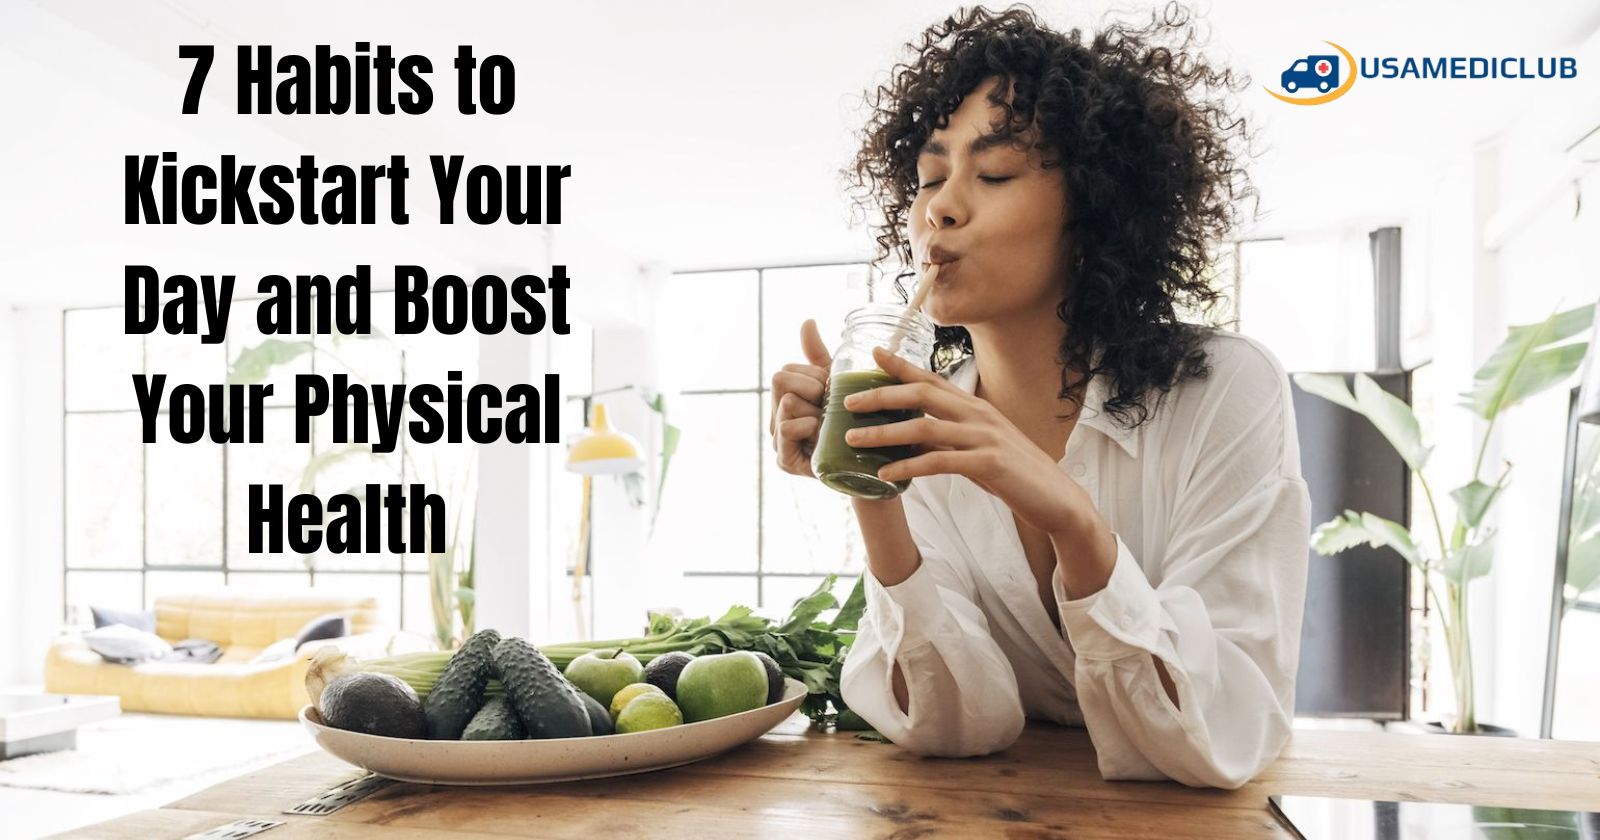 7 Habits to Kickstart Your Day and Boost Your Physical Health